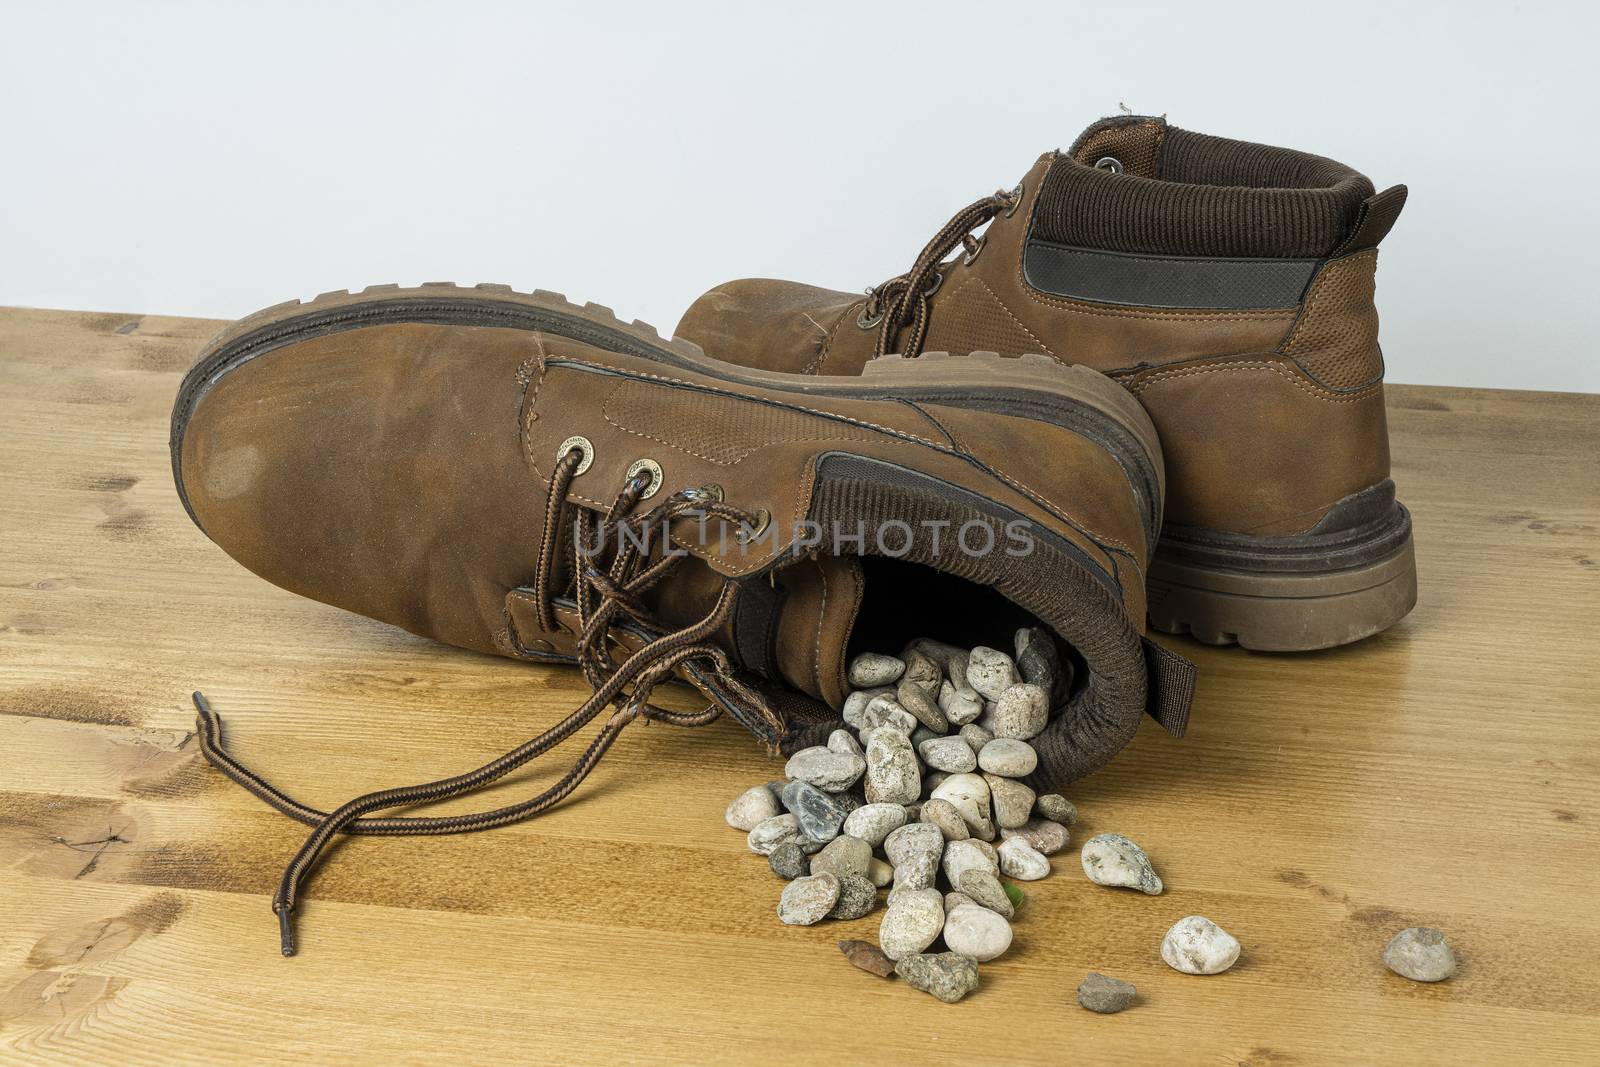 a shoe full of gravel overturned on a wooden surface